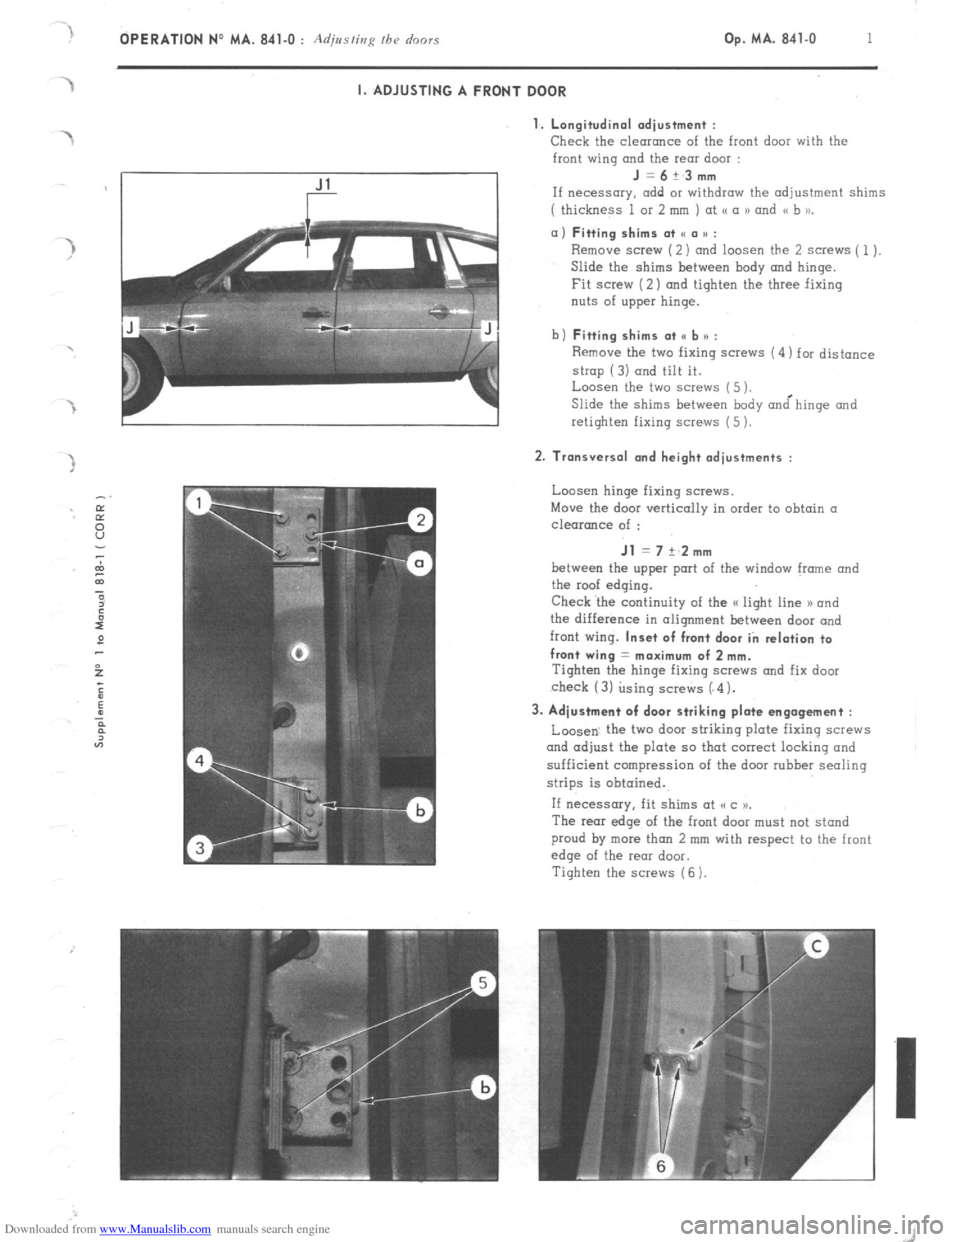 Citroen CX 1974 1.G Workshop Manual Downloaded from www.Manualslib.com manuals search engine OPERATION No MA. 841-O : Adjusting fh~ doors Op. MA. 841-O 1 I. ADJUSTING A FRONT DOOR 
1. Longitudinal adiustment : 
Check 
the clearance of t